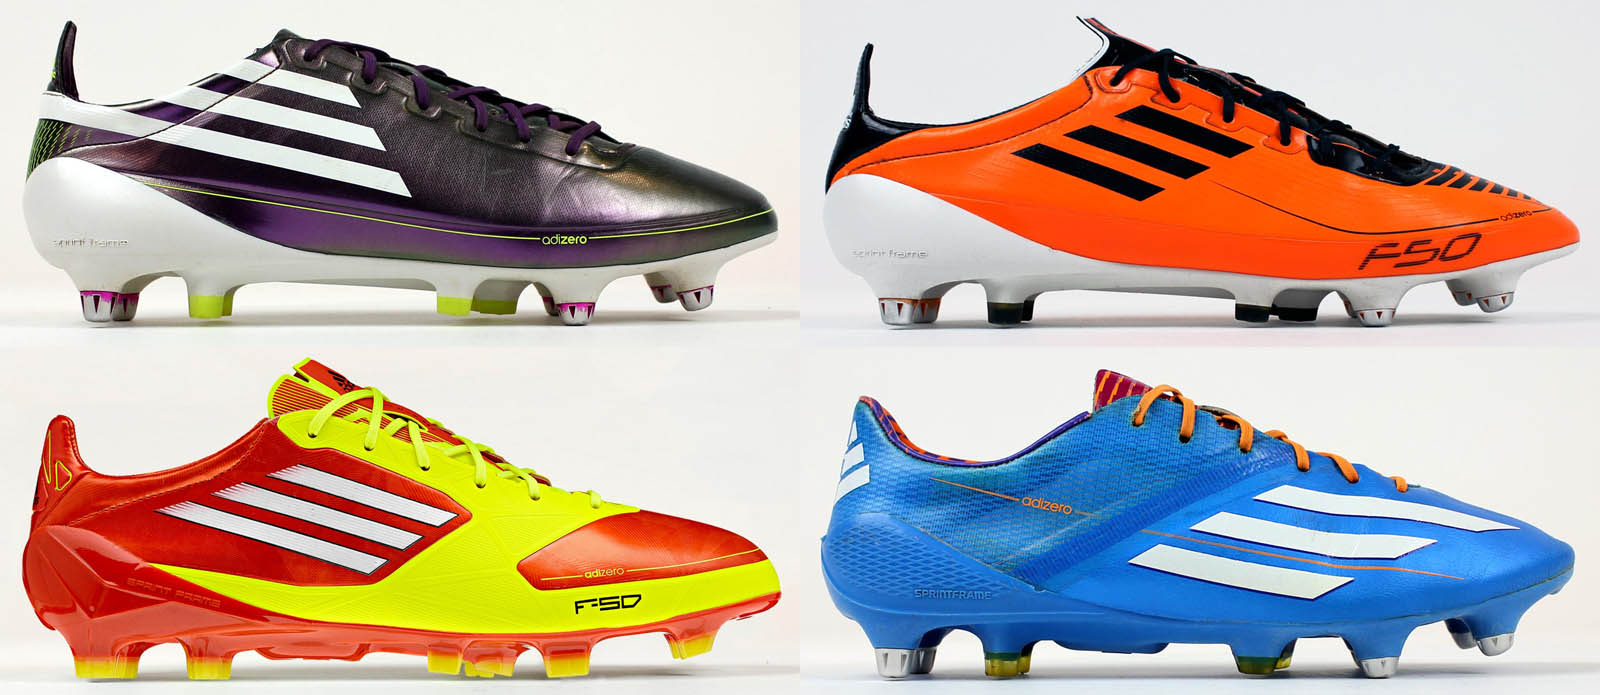 Exclusive: Adidas to Release F50 Ghosted Adizero 'Legends' Boots - Adipure & Predator Pulse - Footy Headlines